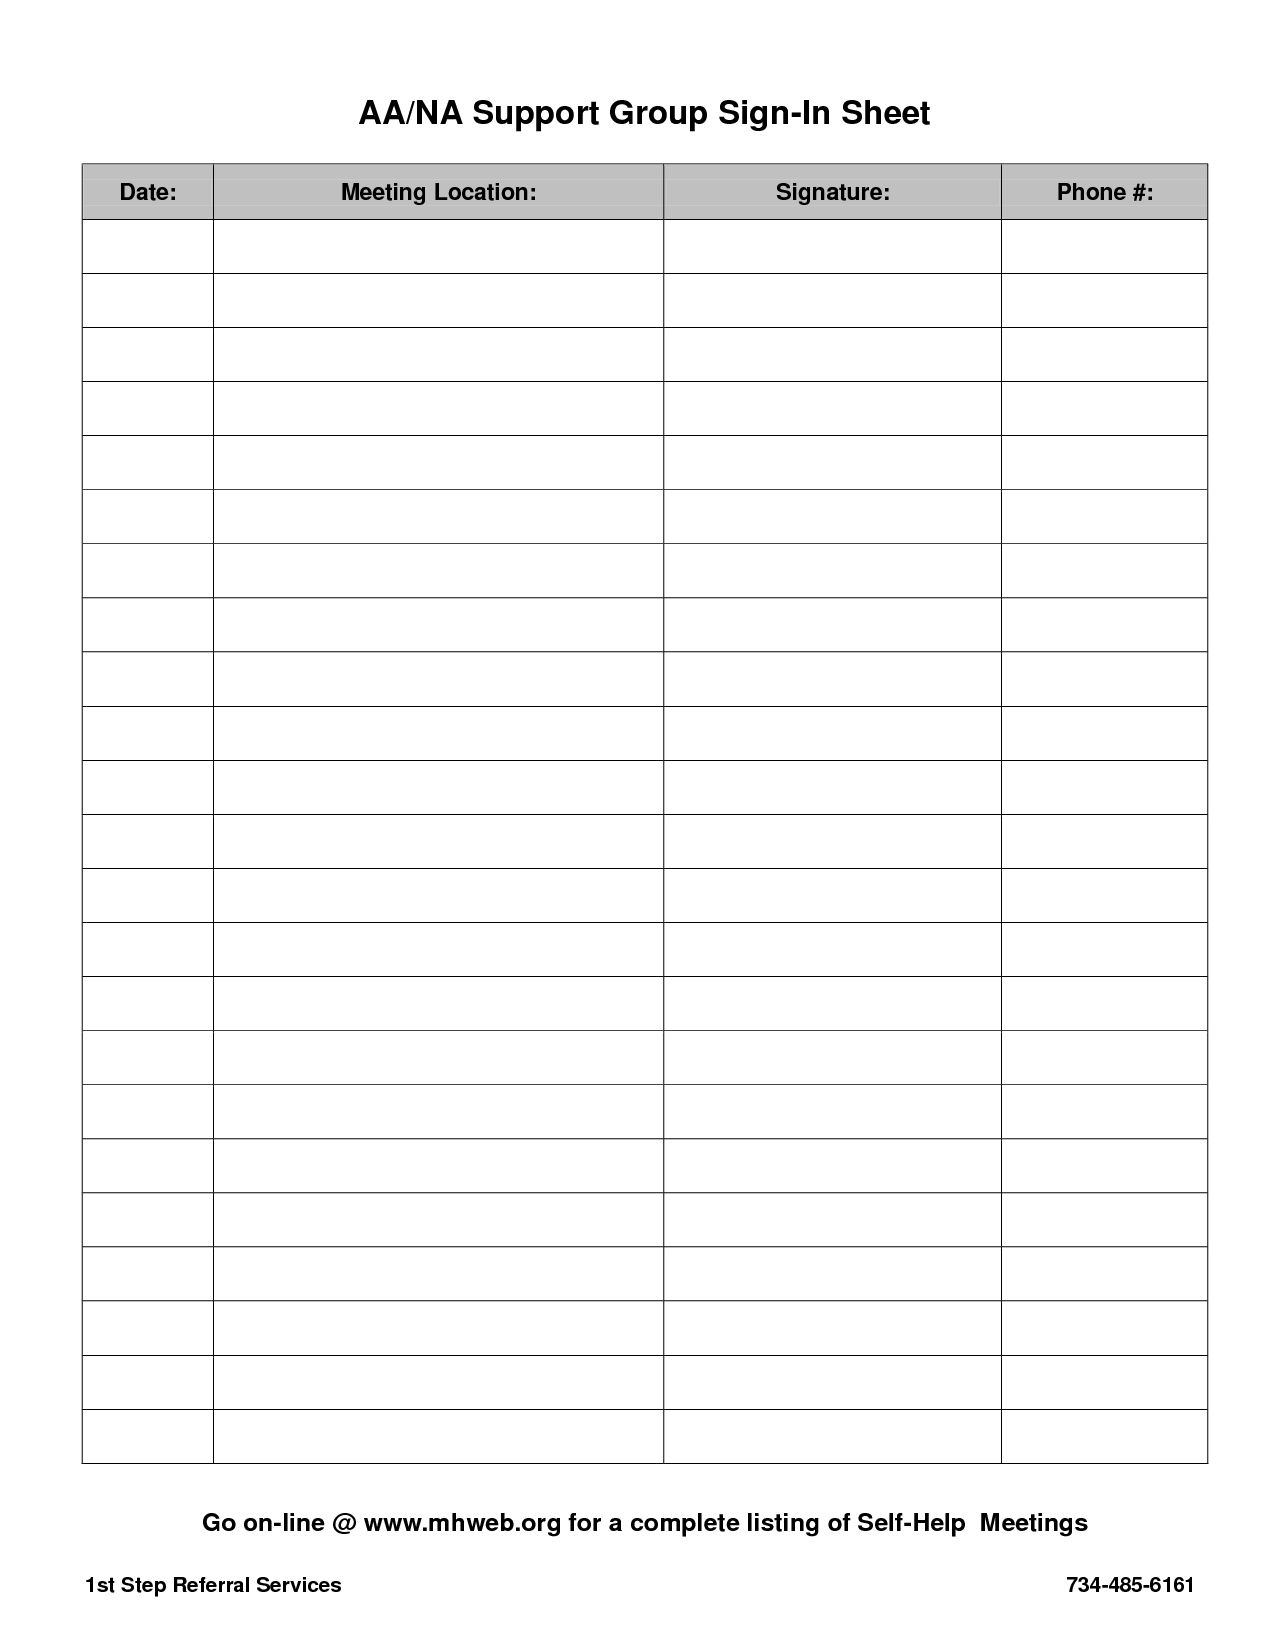 New Meeting Sign In Sheet Template Word #exceltemplate #xls